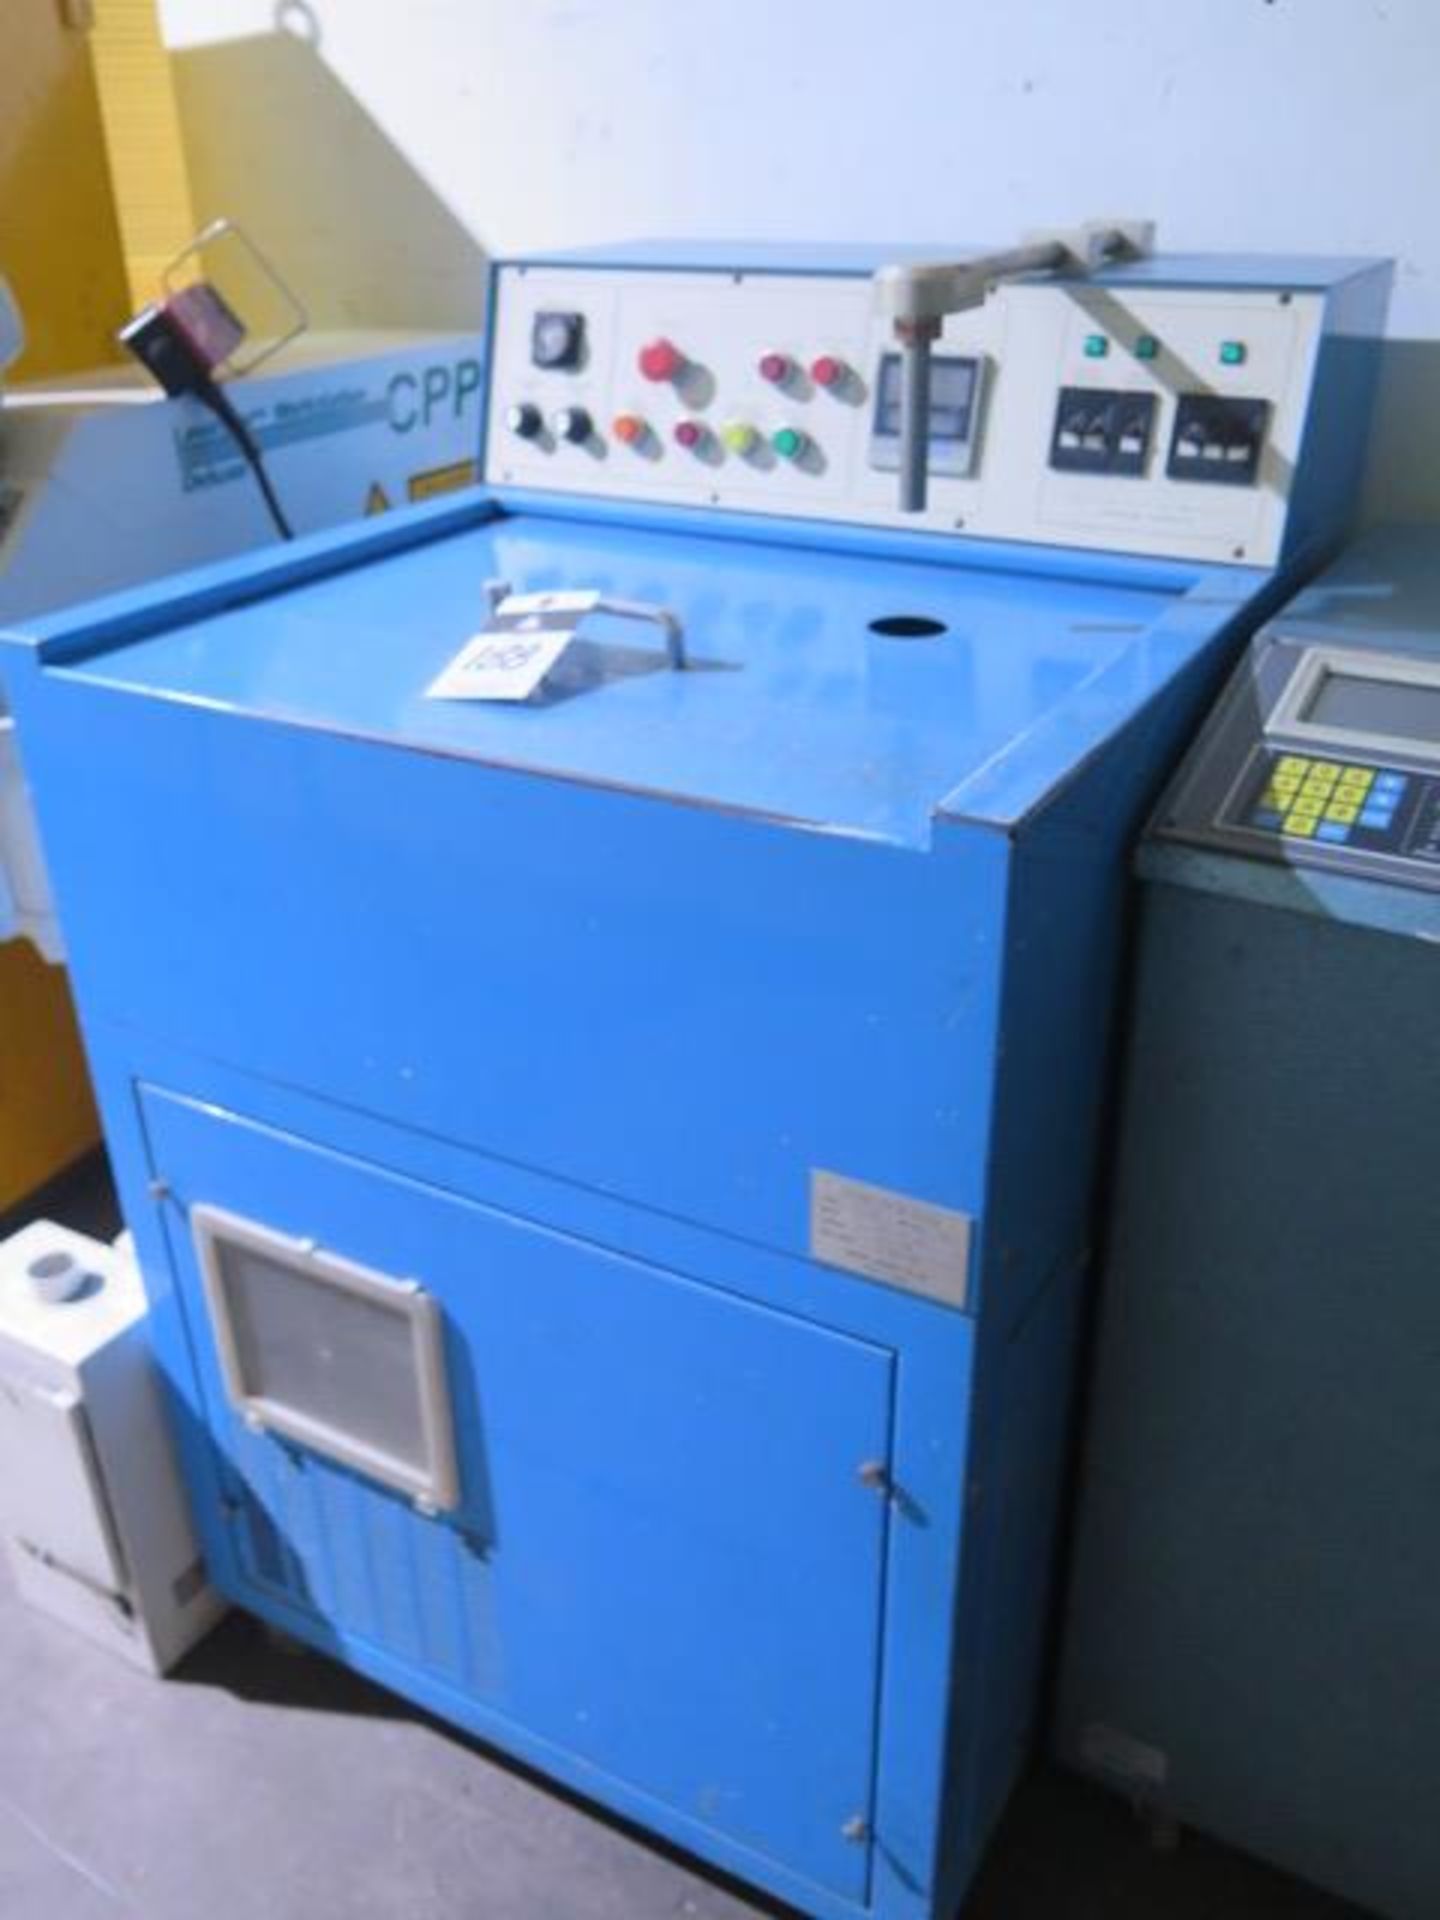 1999 Tanabe Kenden type TCP-3300 Platinum Casting Furnace s/n 9906 w/ 60KHz 7kW Output - Image 2 of 6